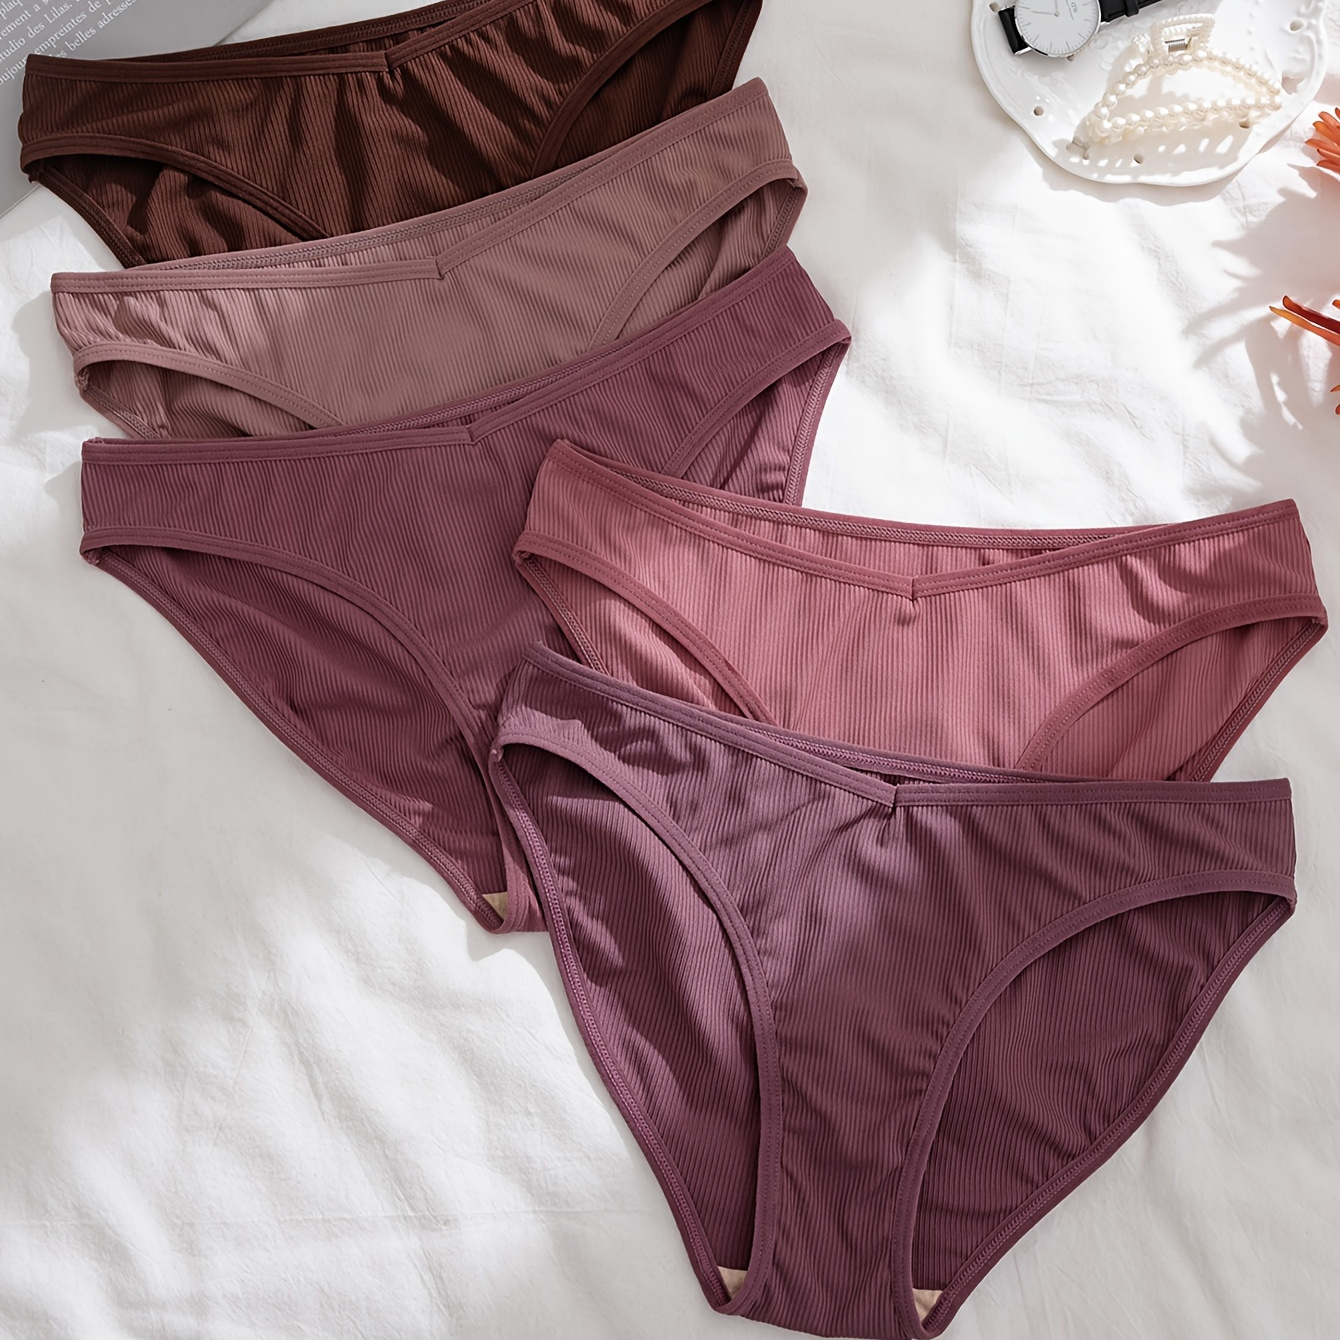 

5pcs Elegant Breathable Panties, Comfortable Underwear Briefs In Assorted Colors, Soft Stretchable Fabric For Daily Wear